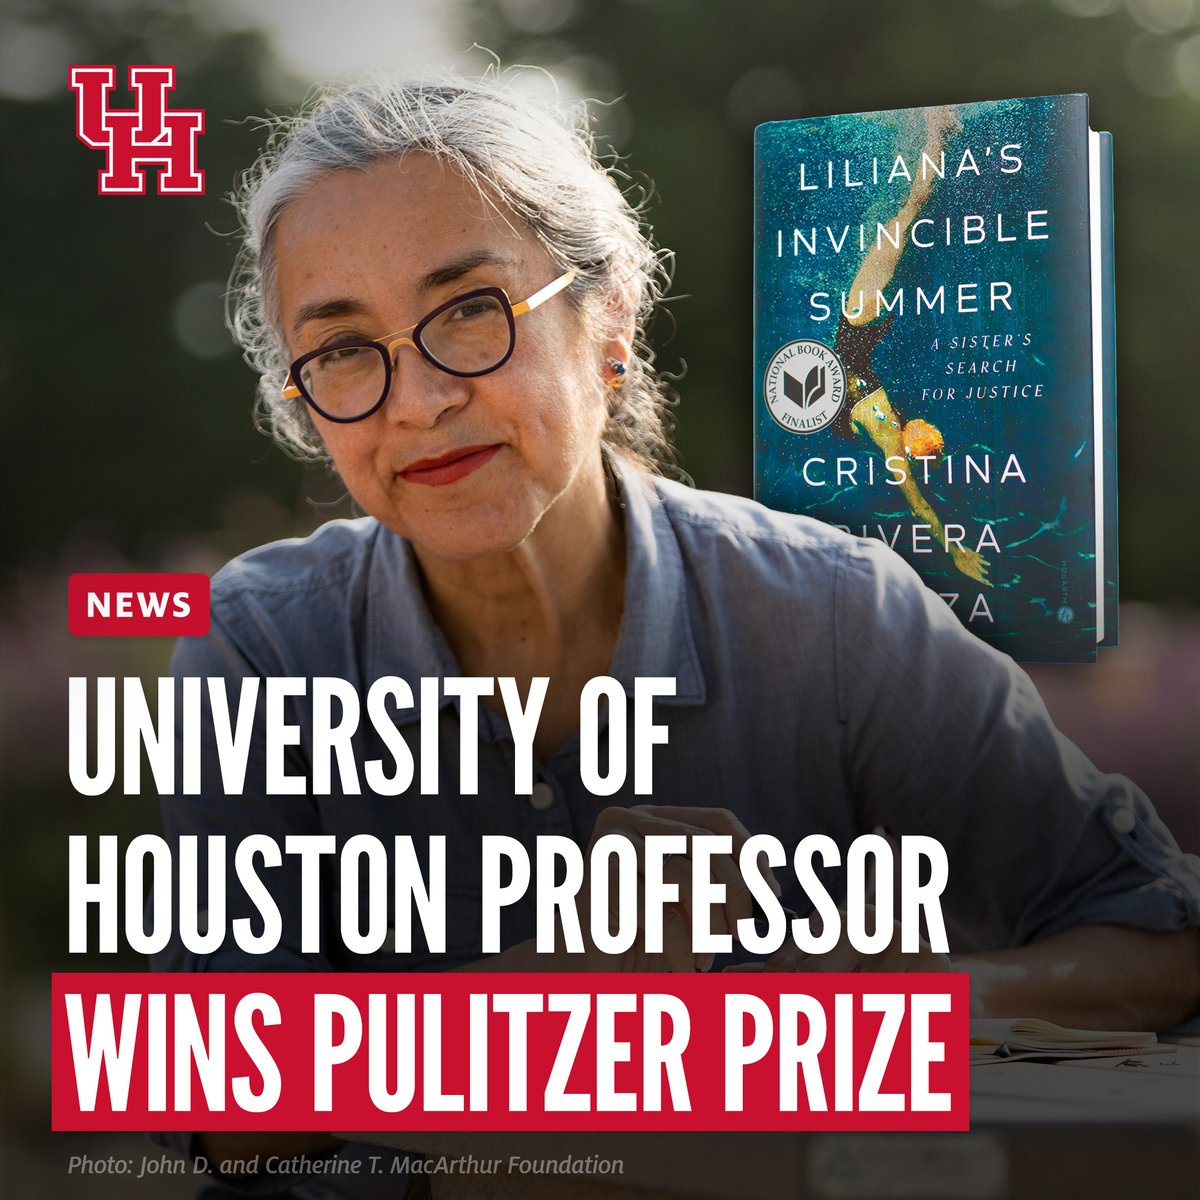 Congratulations to UH professor Cristina Rivera Garza for winning the 2024 Pulitzer Prize for her memoir “Liliana’s Invincible Summer: A Sister’s Search for Justice.” Read more about her accomplishment: stories.uh.edu/2024-rivera-ga…